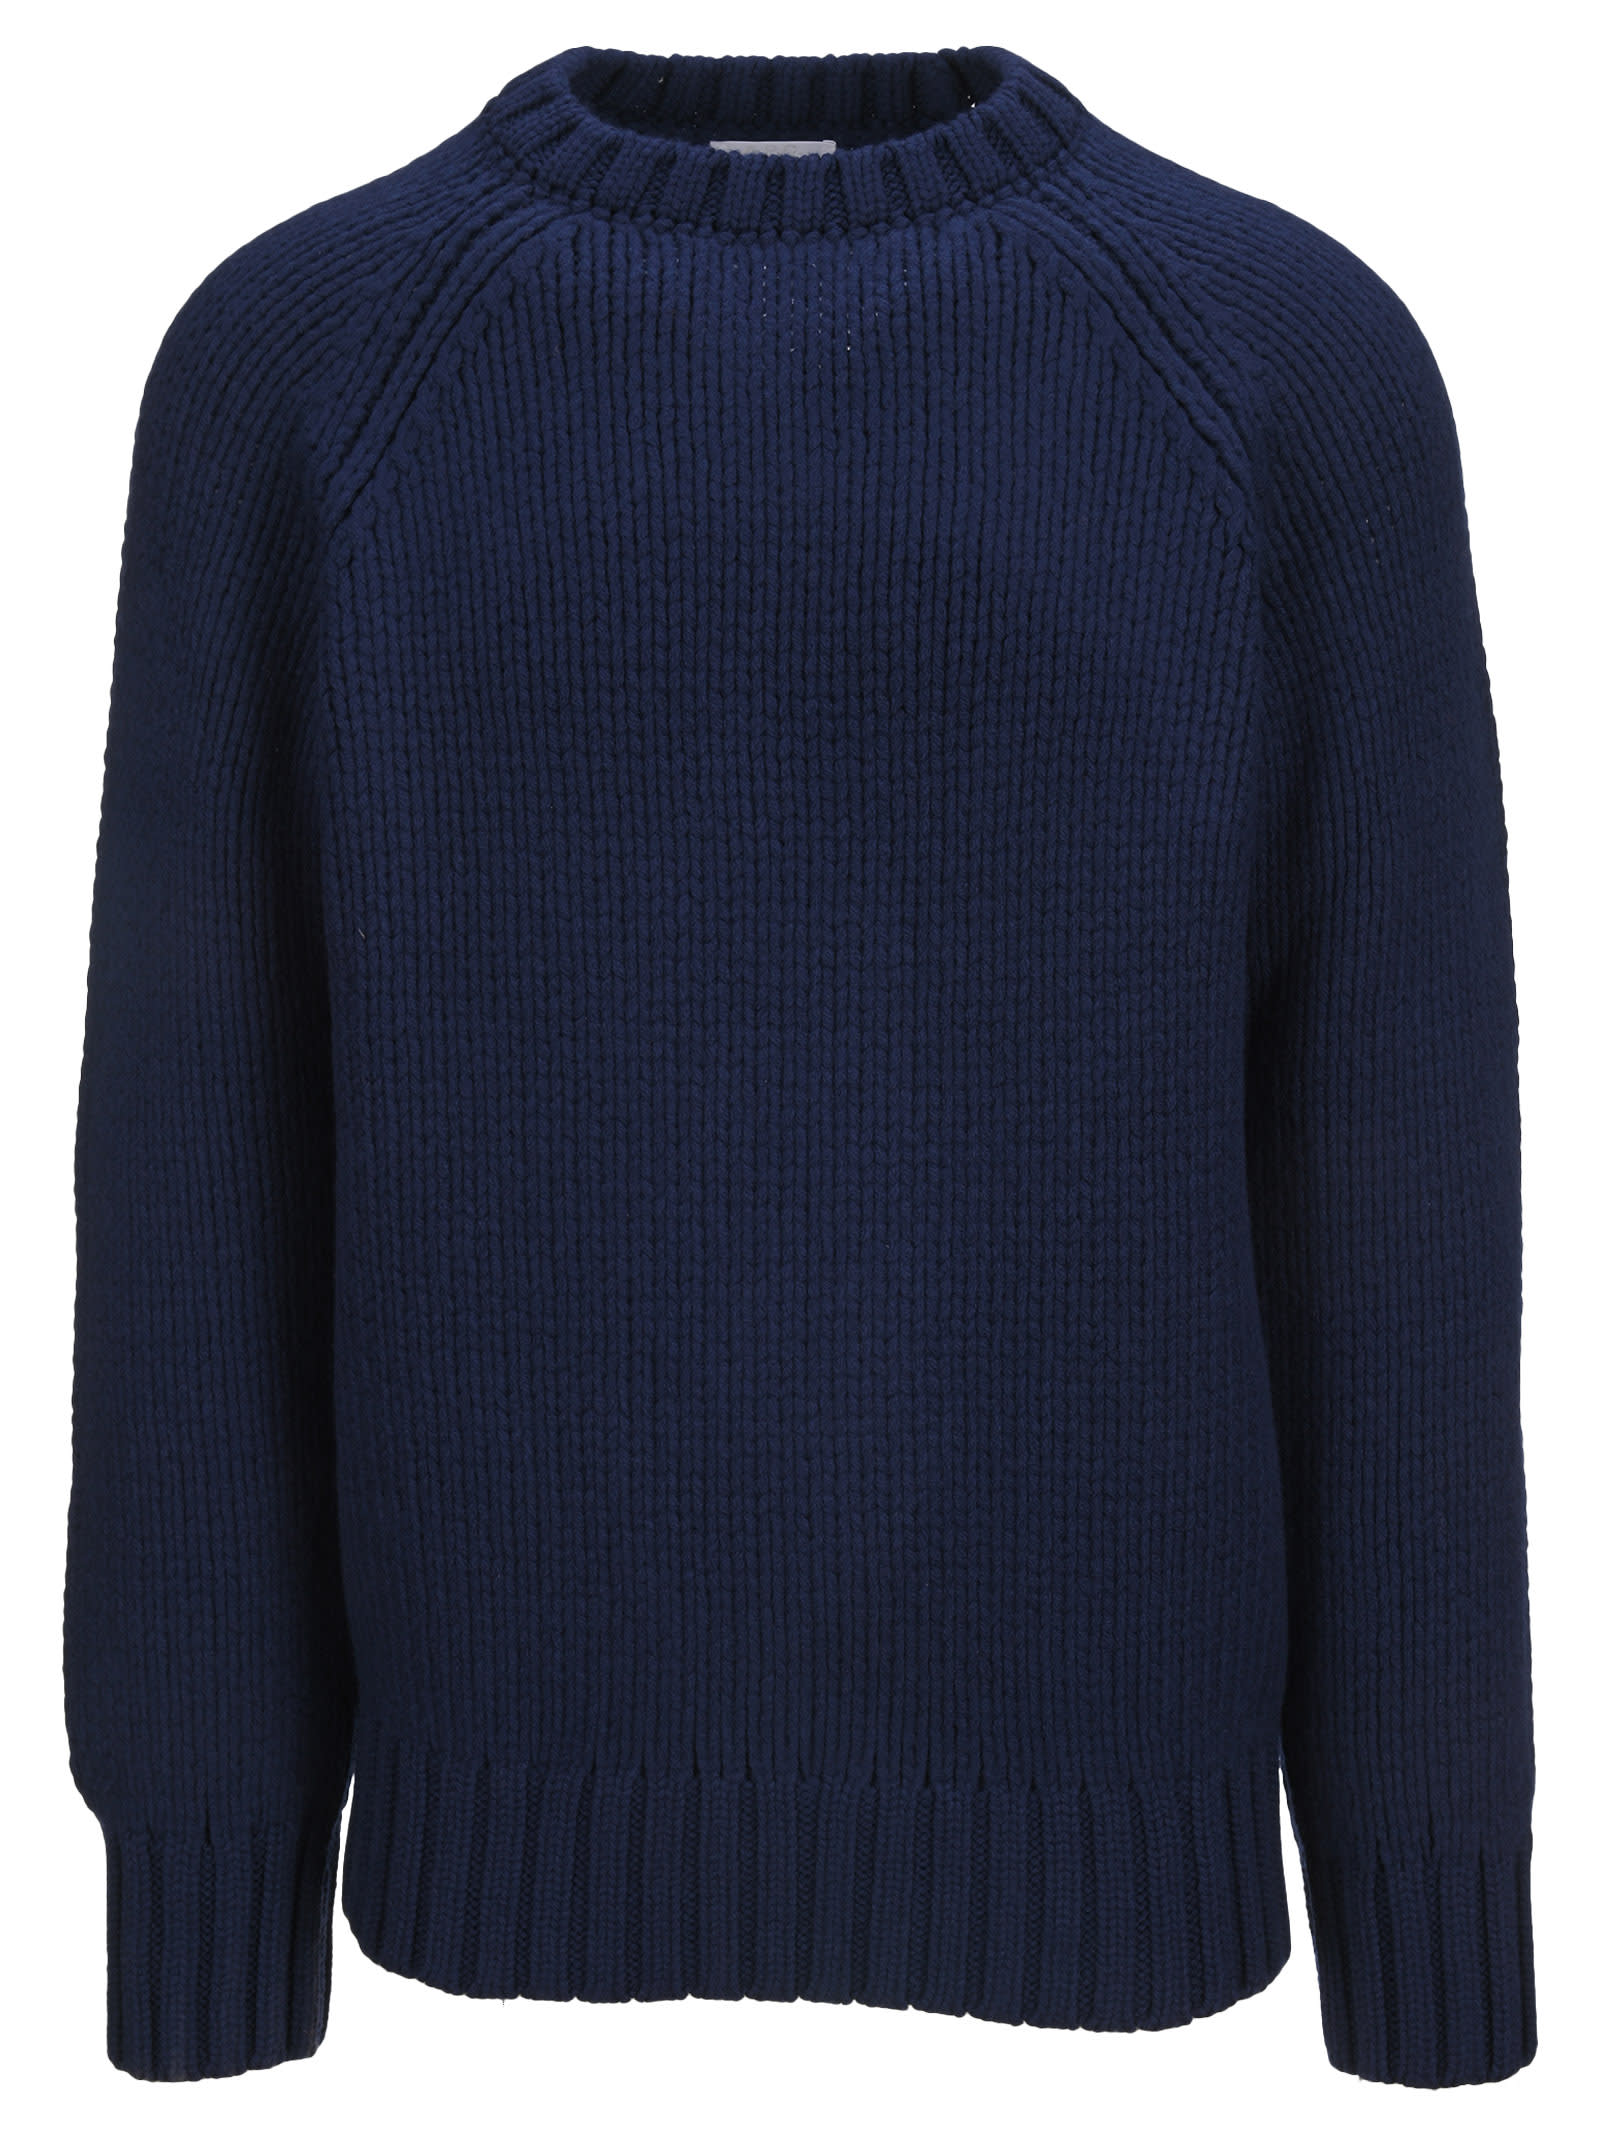 A.p.c. X Suzanne Koller Crew-neck Knitted Jumper